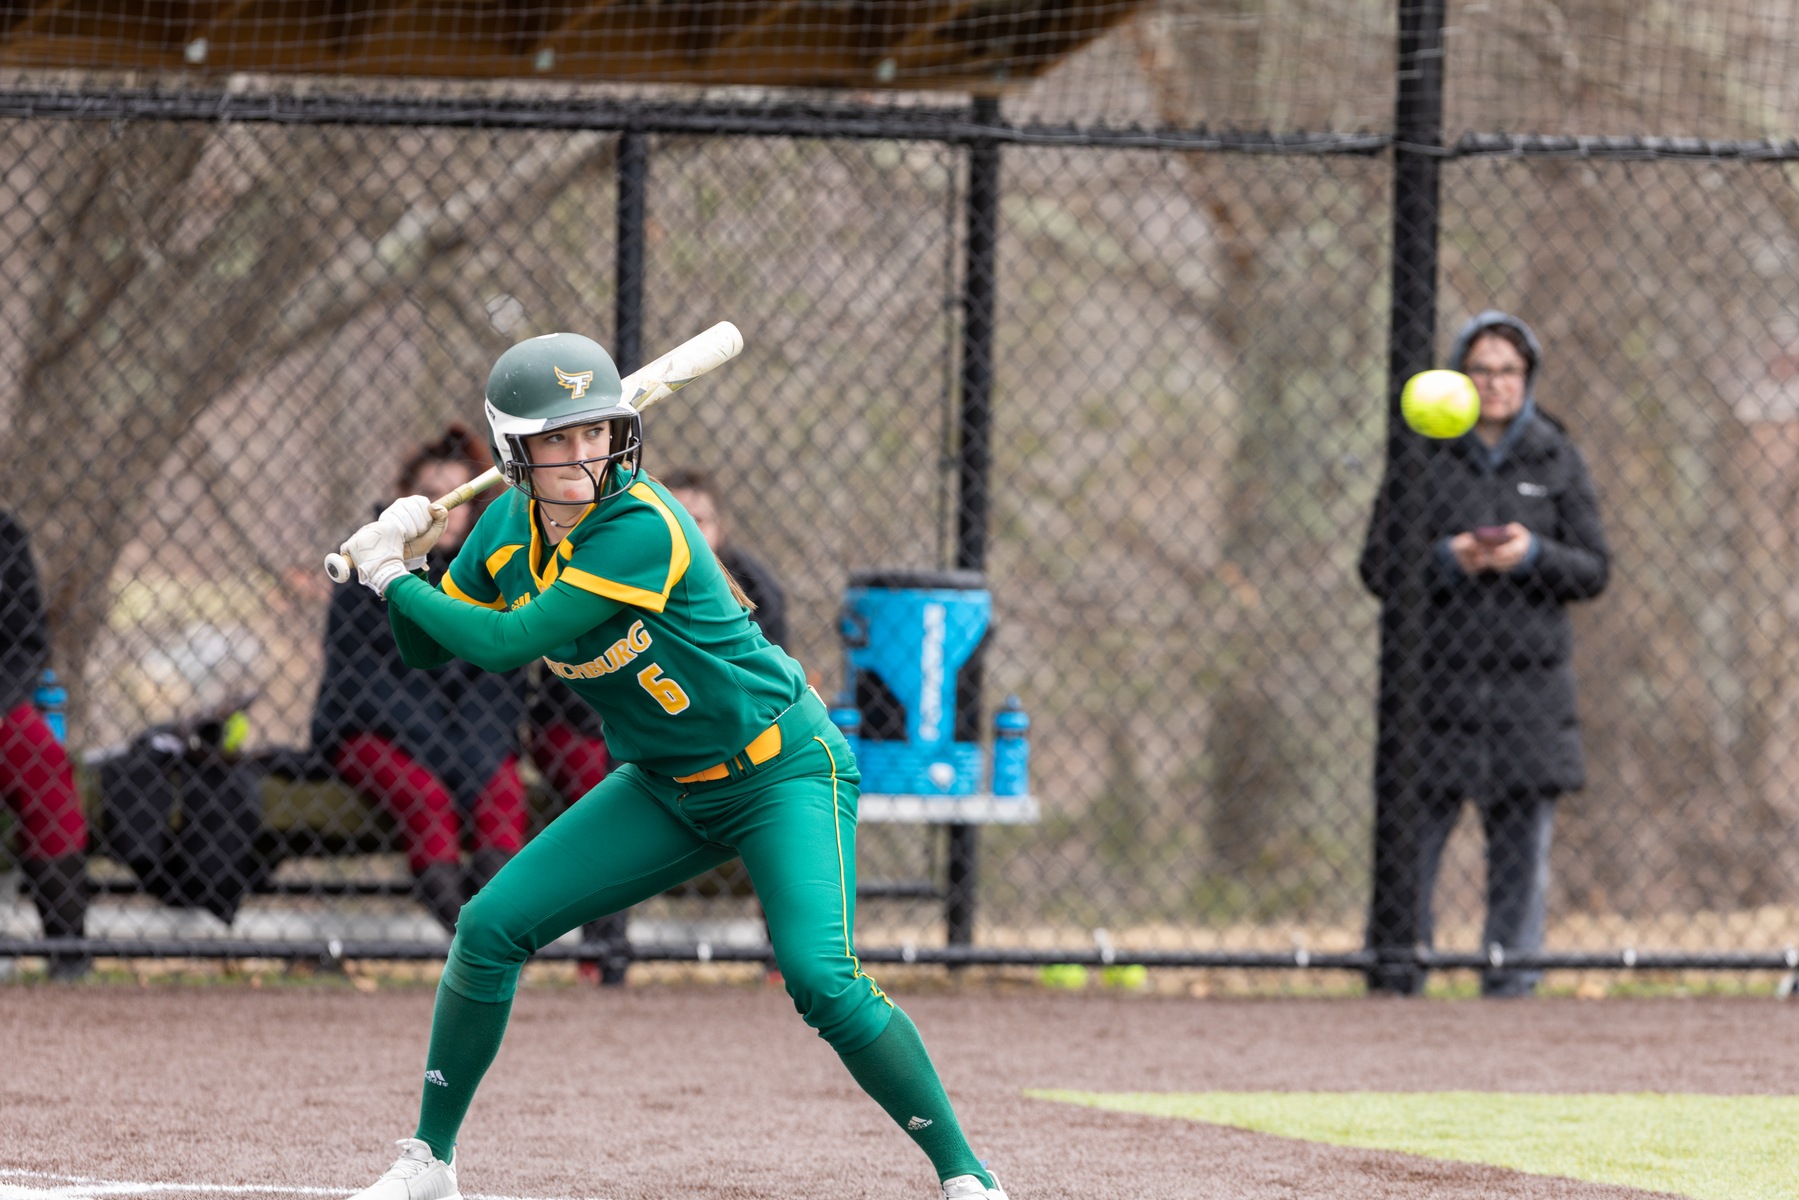 Falcons Drop Pair Of Contests On Final Day At Fast Pitch Dreams Classic